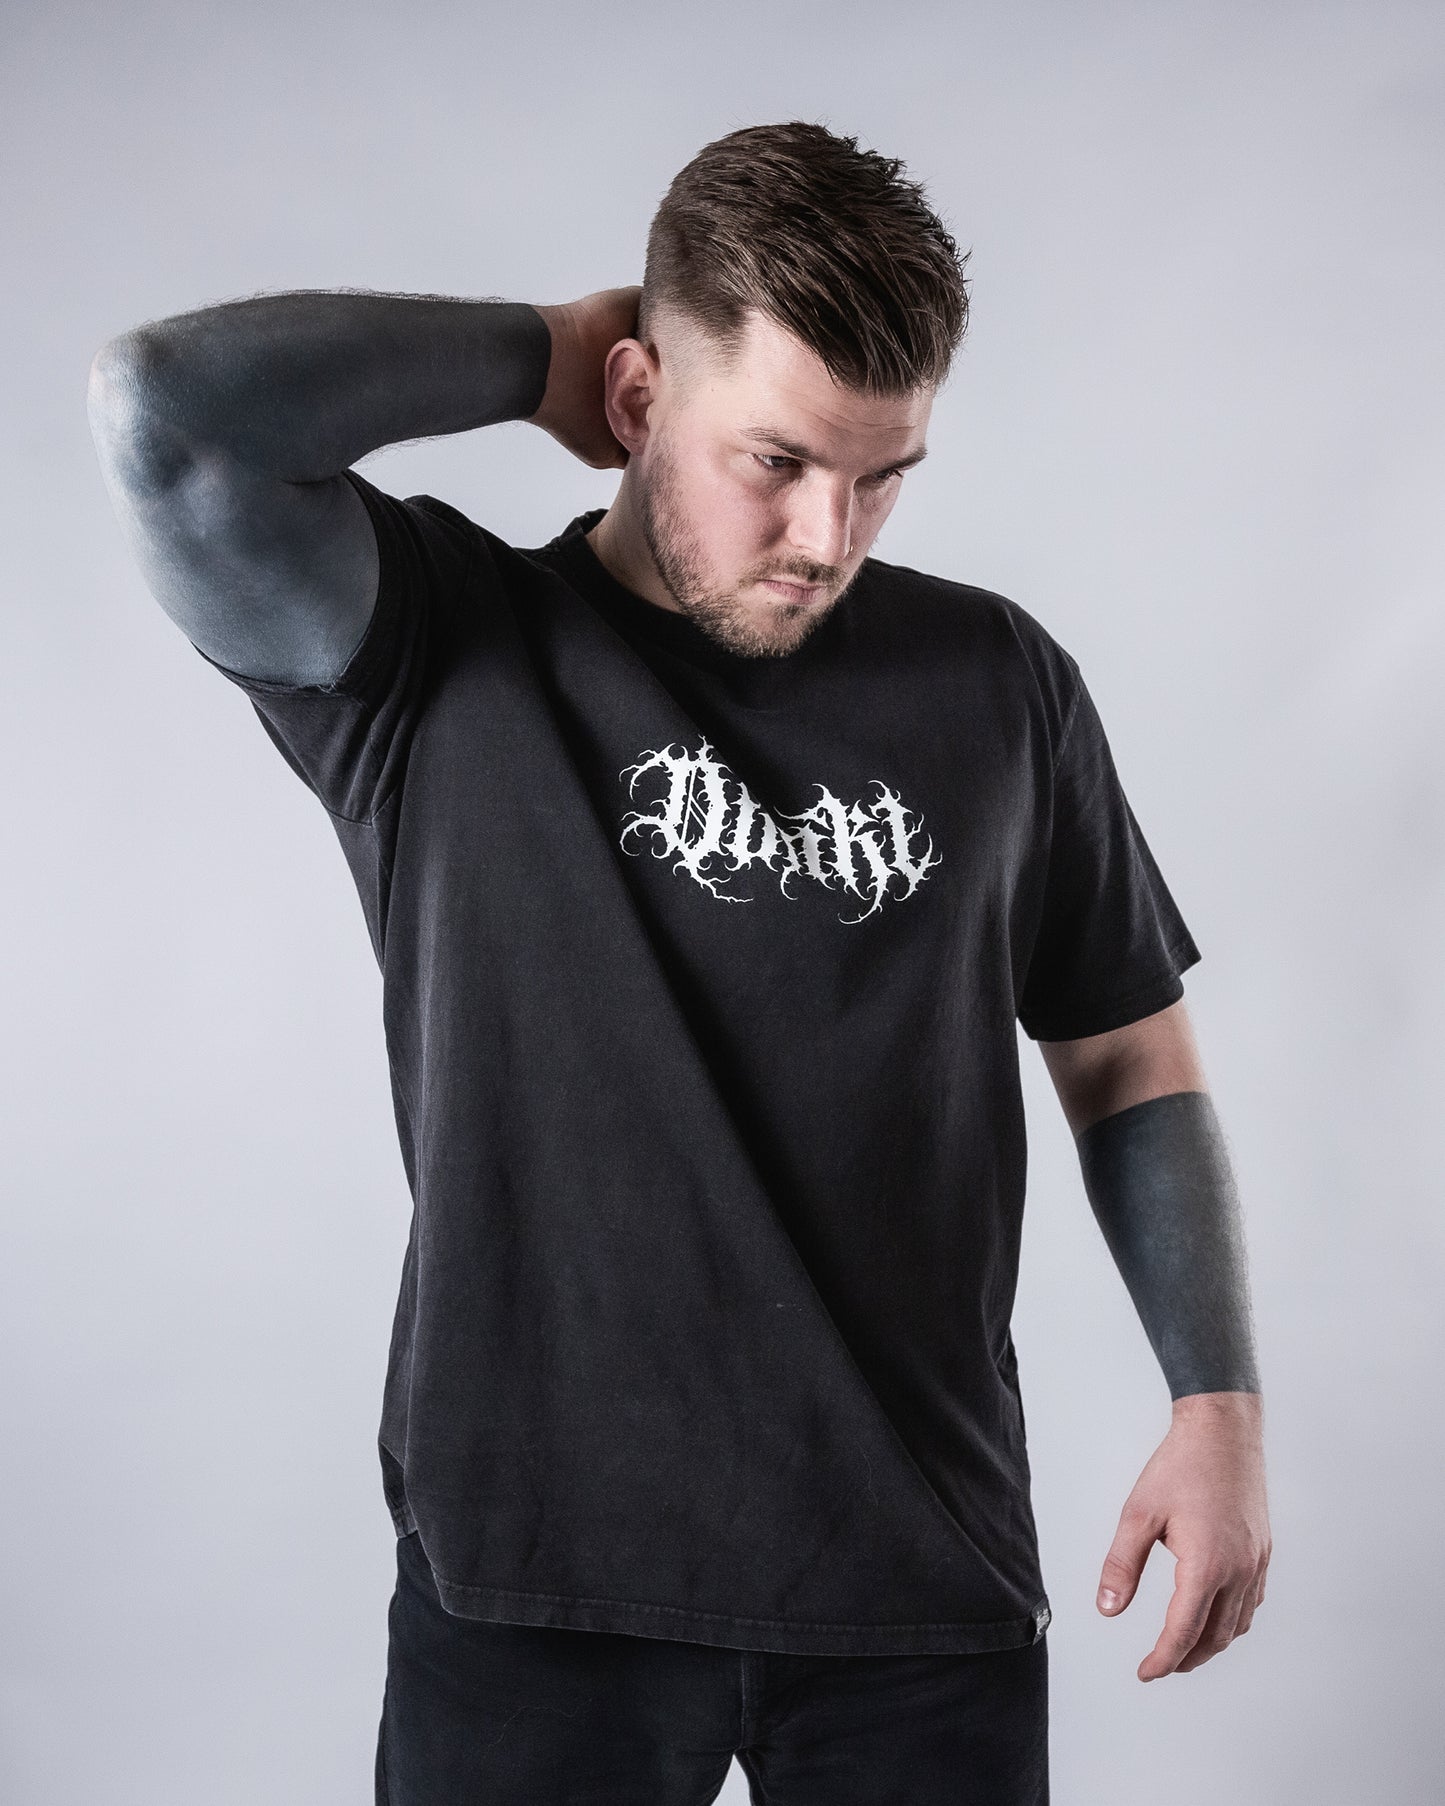 DUNKL BLK WASHED OUT SHIRT